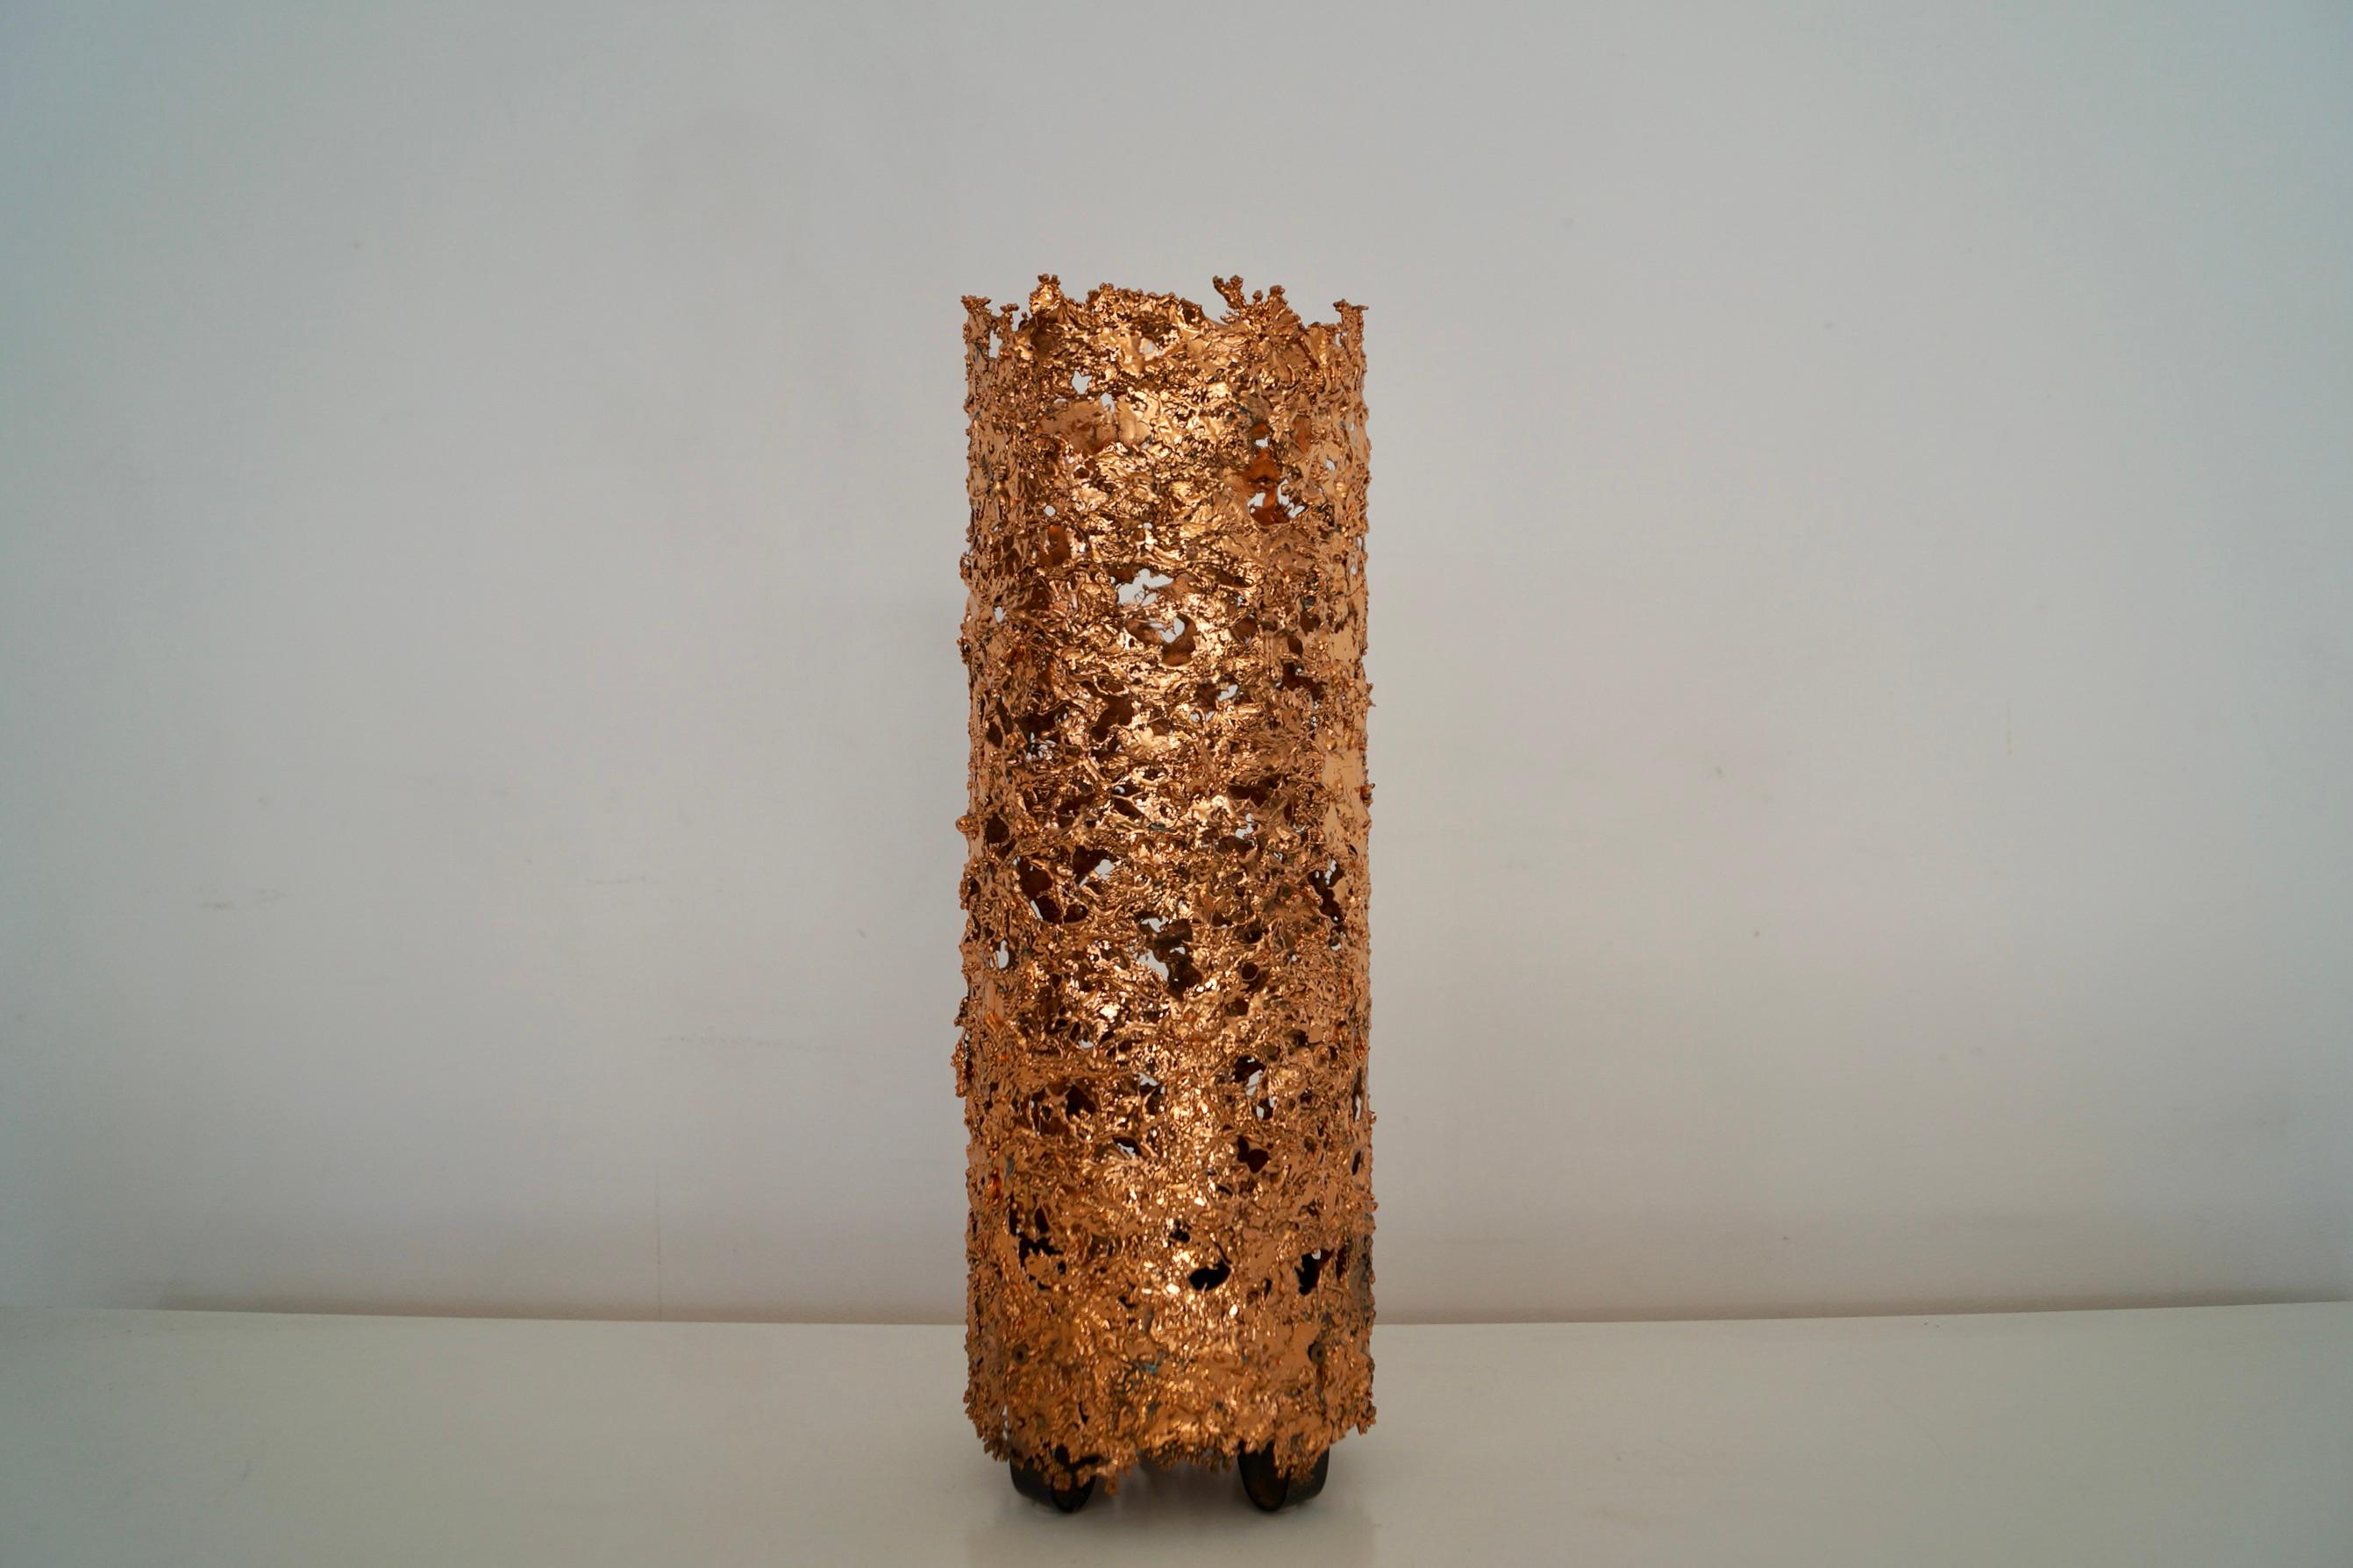 Vintage brutalist Midcentury Modern table lamp for sale. Designed by Aimo Tukianien from Finland, and very beautiful. Made of solid melted copper, and a wonderful sculptural lamp. Beautiful texture and cylinder design, and in great working